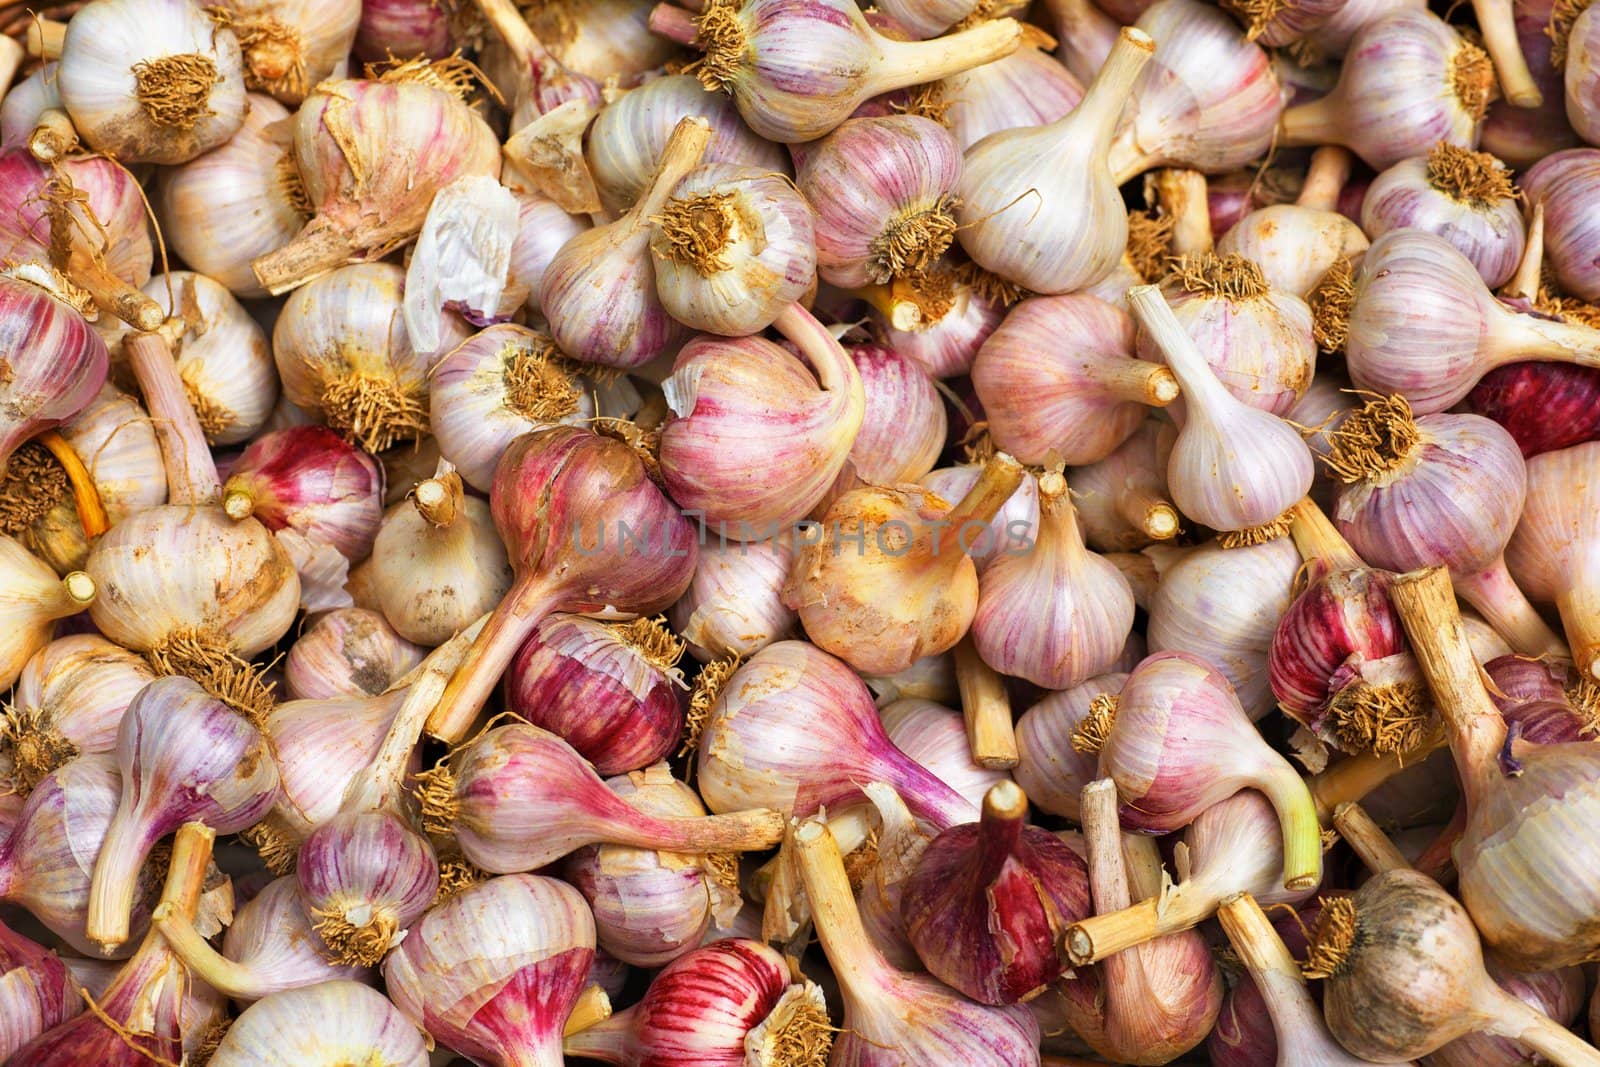 Pile of garlic at the farmers market